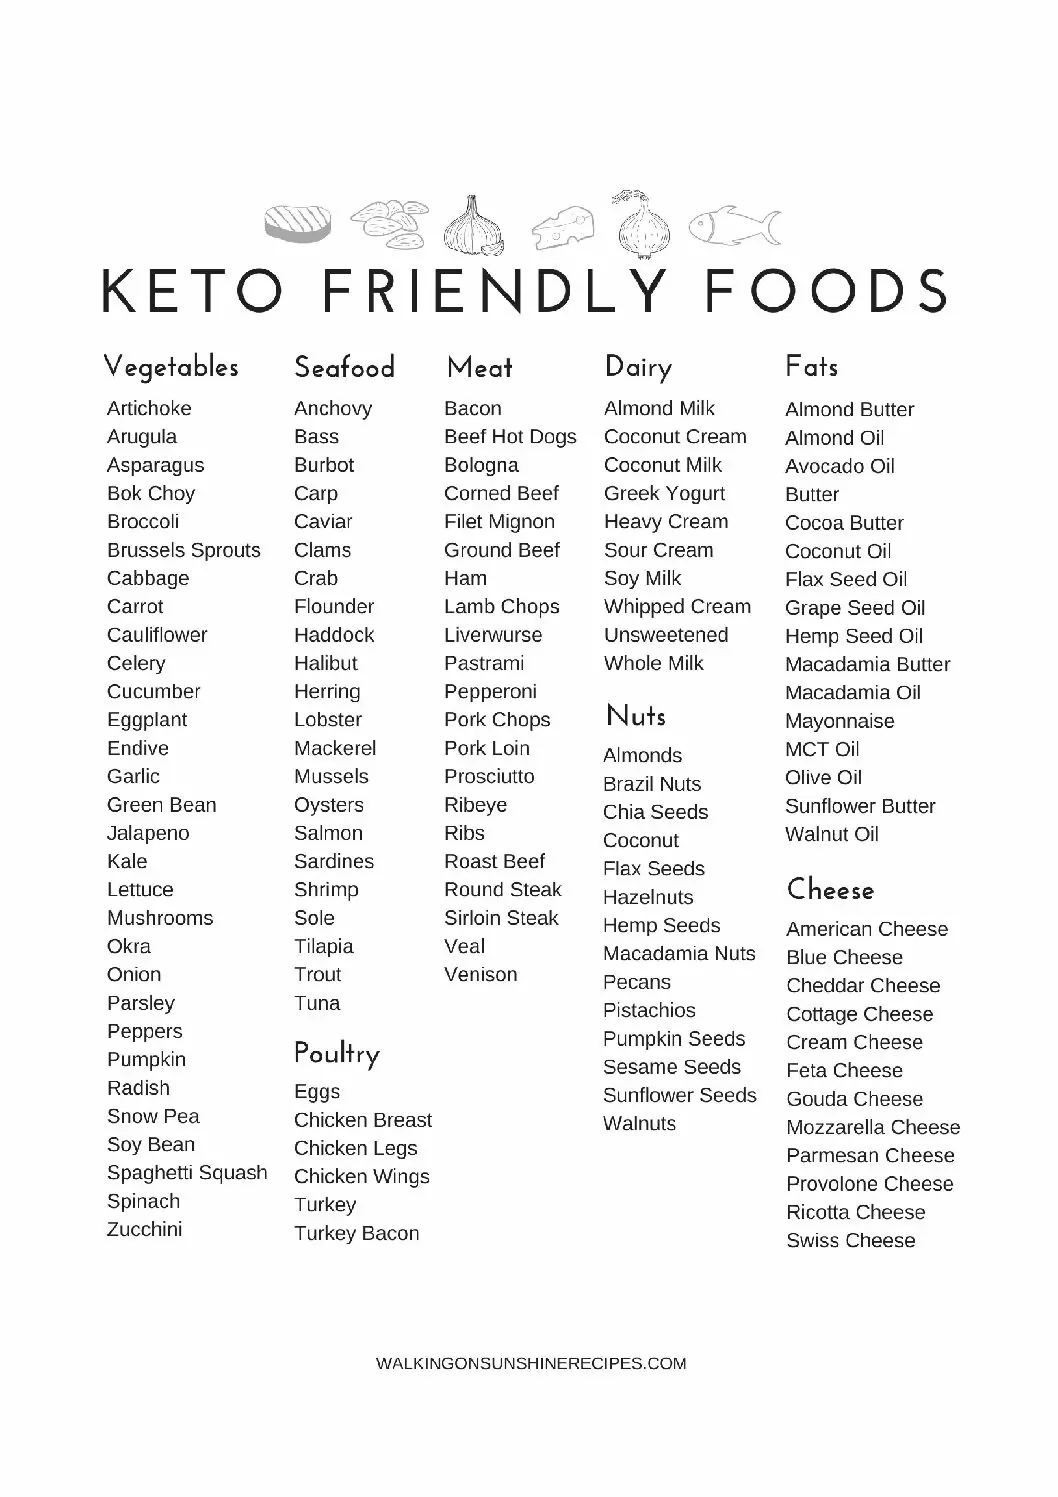 5 Delicious Keto Friendly Recipes for Dinner | Weekly Meal Plan